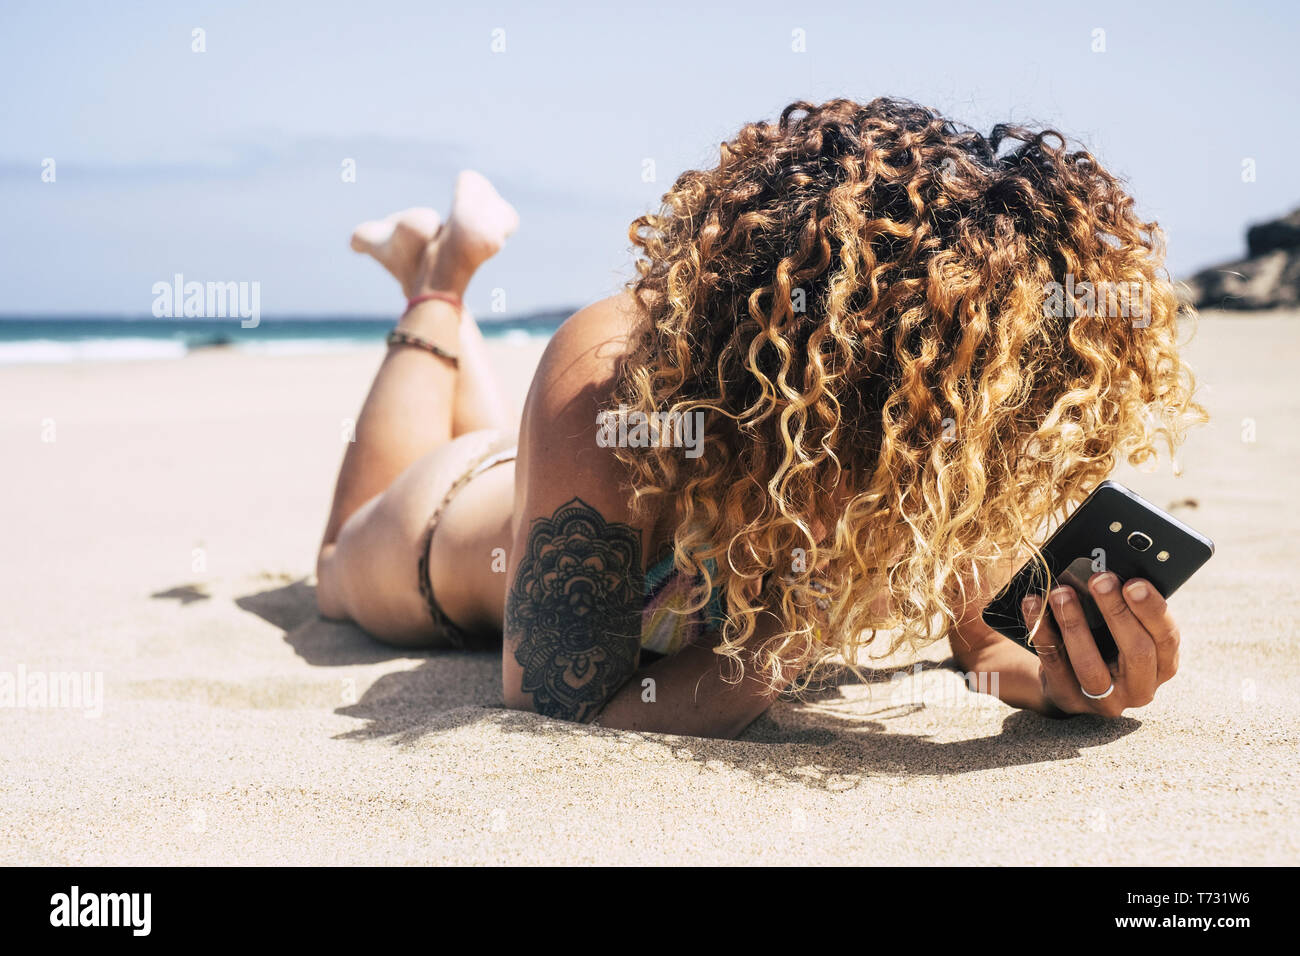 Unrecognizable bikini attractive young woman enjoying the summer holiday vacation at the beach laying down on the sand to take a wonderful sunbath wit Stock Photo